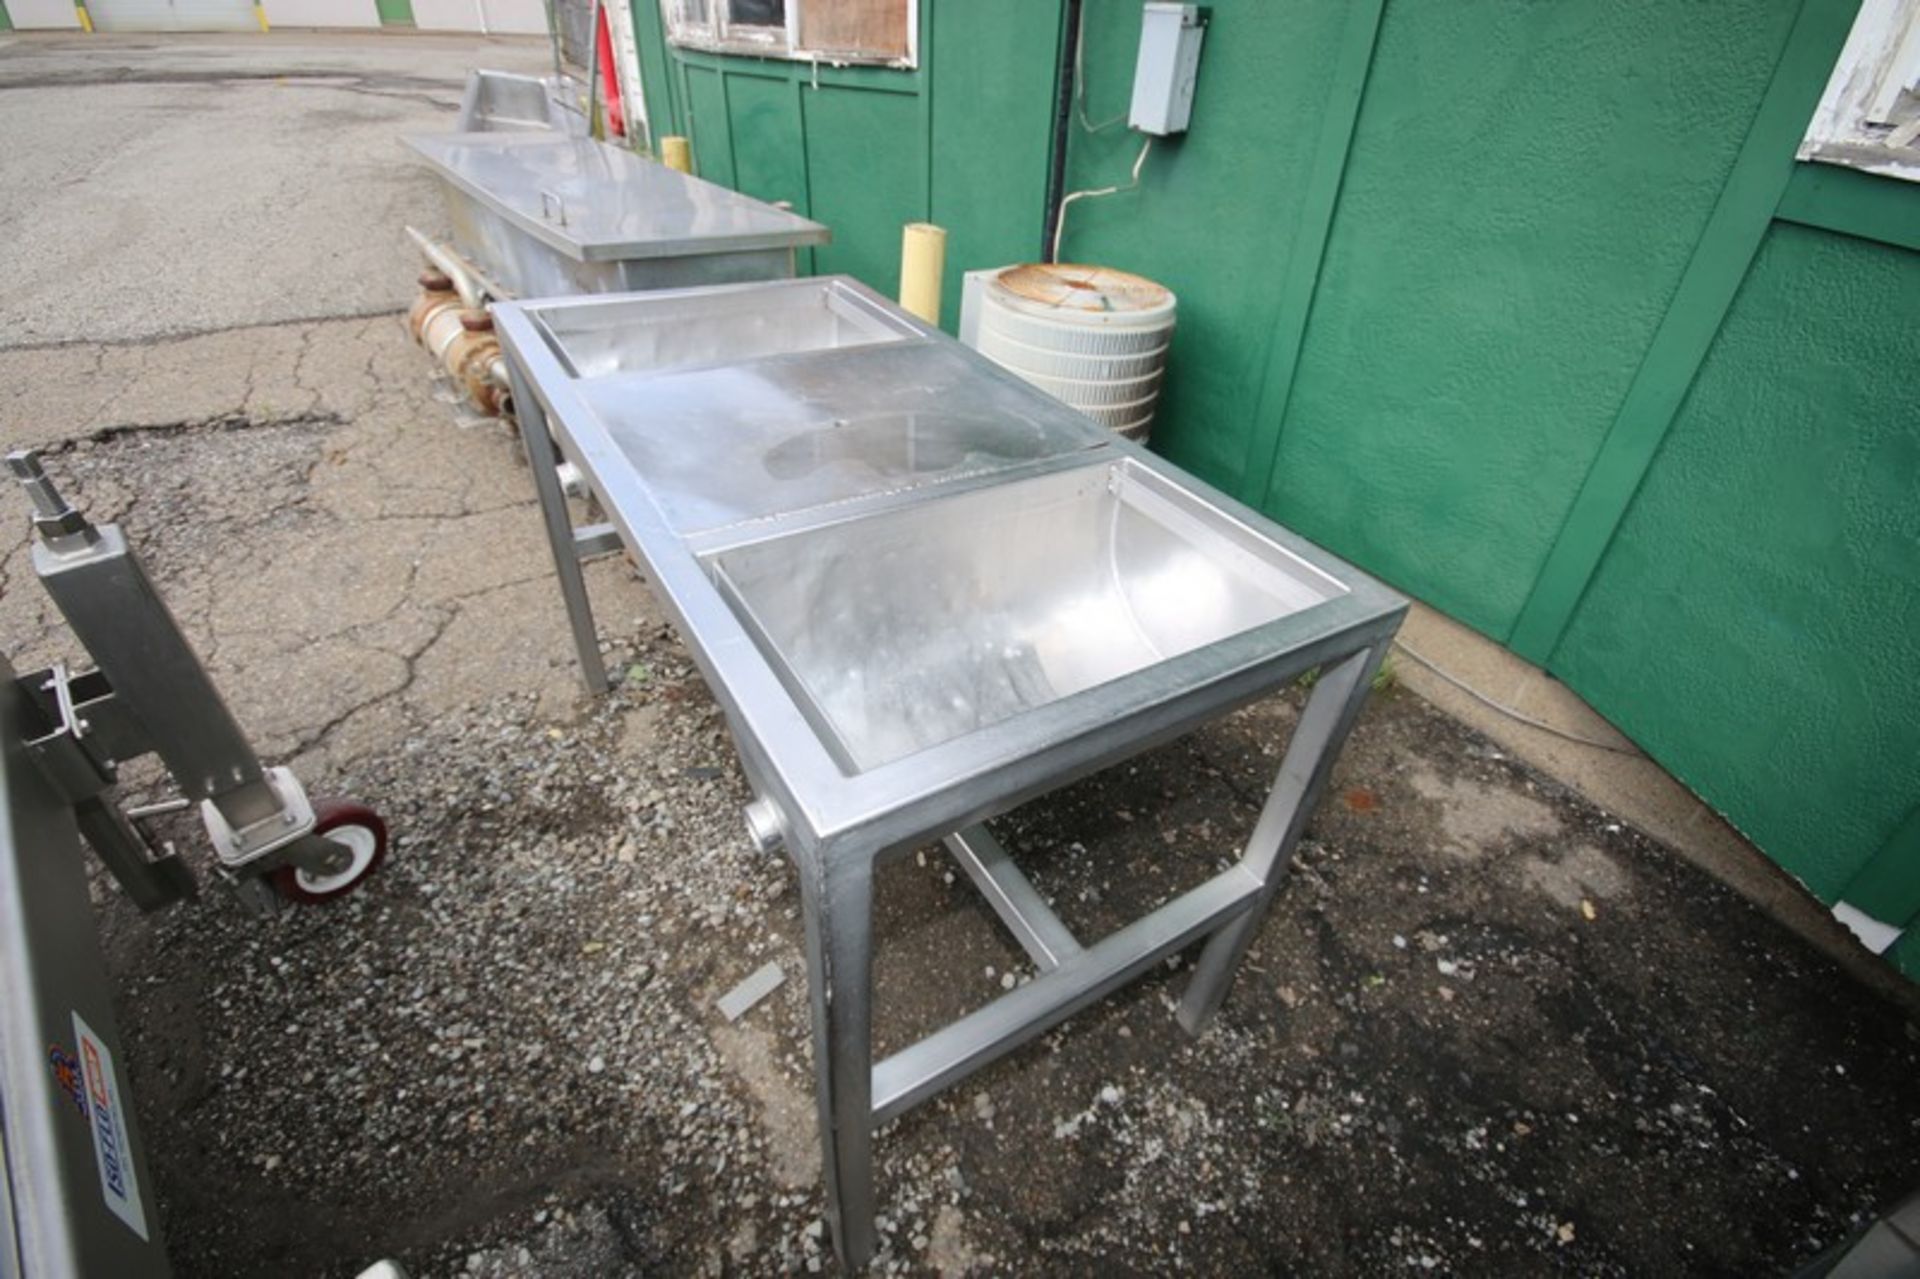 2-Bowl S/S Wash Sink,Overall Dims.: Aprox. 5' L x 30" W x 37" H (INV#69302) (Located at the MDG - Image 3 of 5